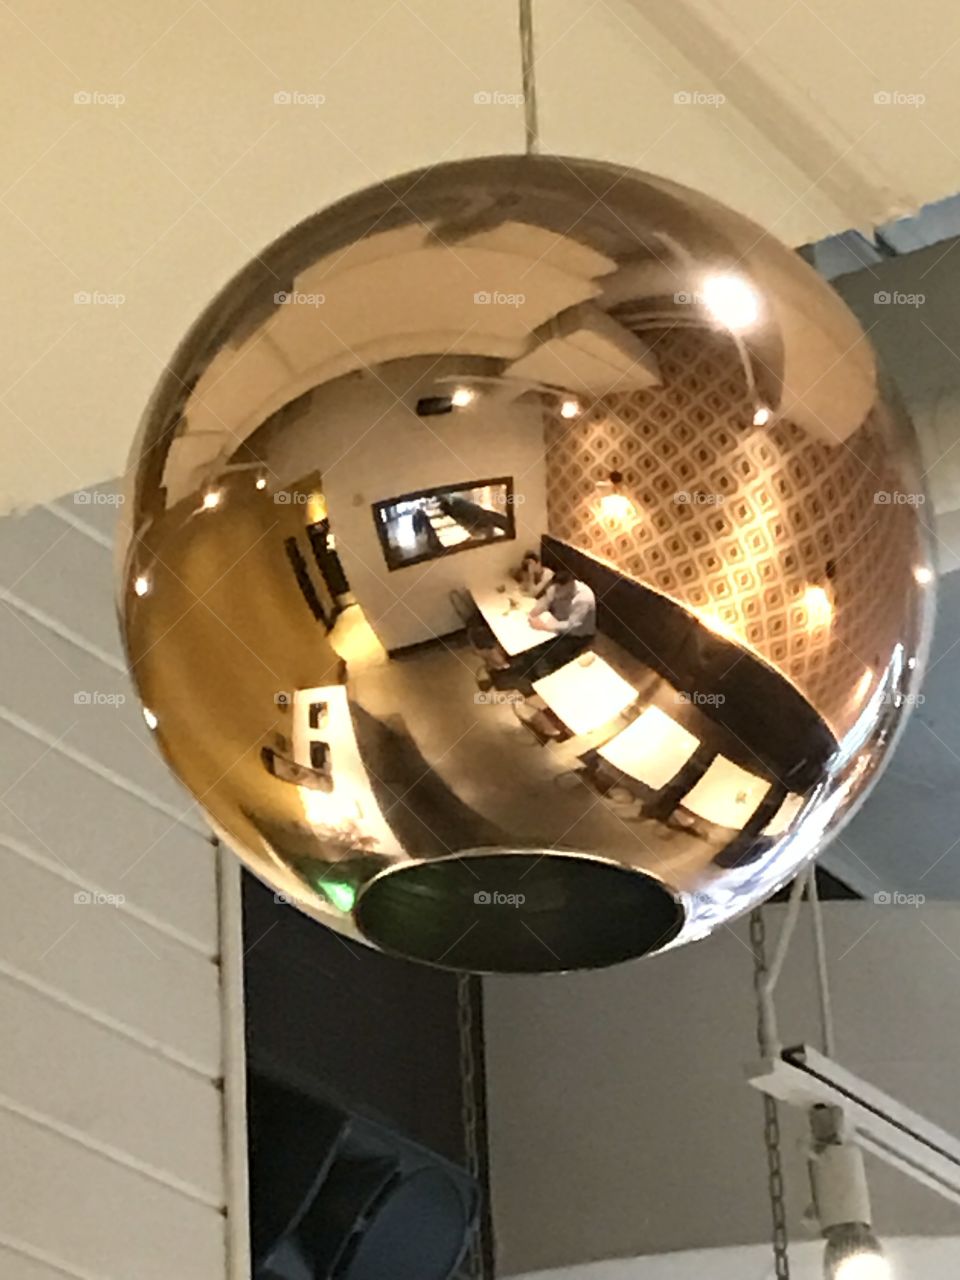 Reflection caught in spherical gold lighting fixture at cozy cafe